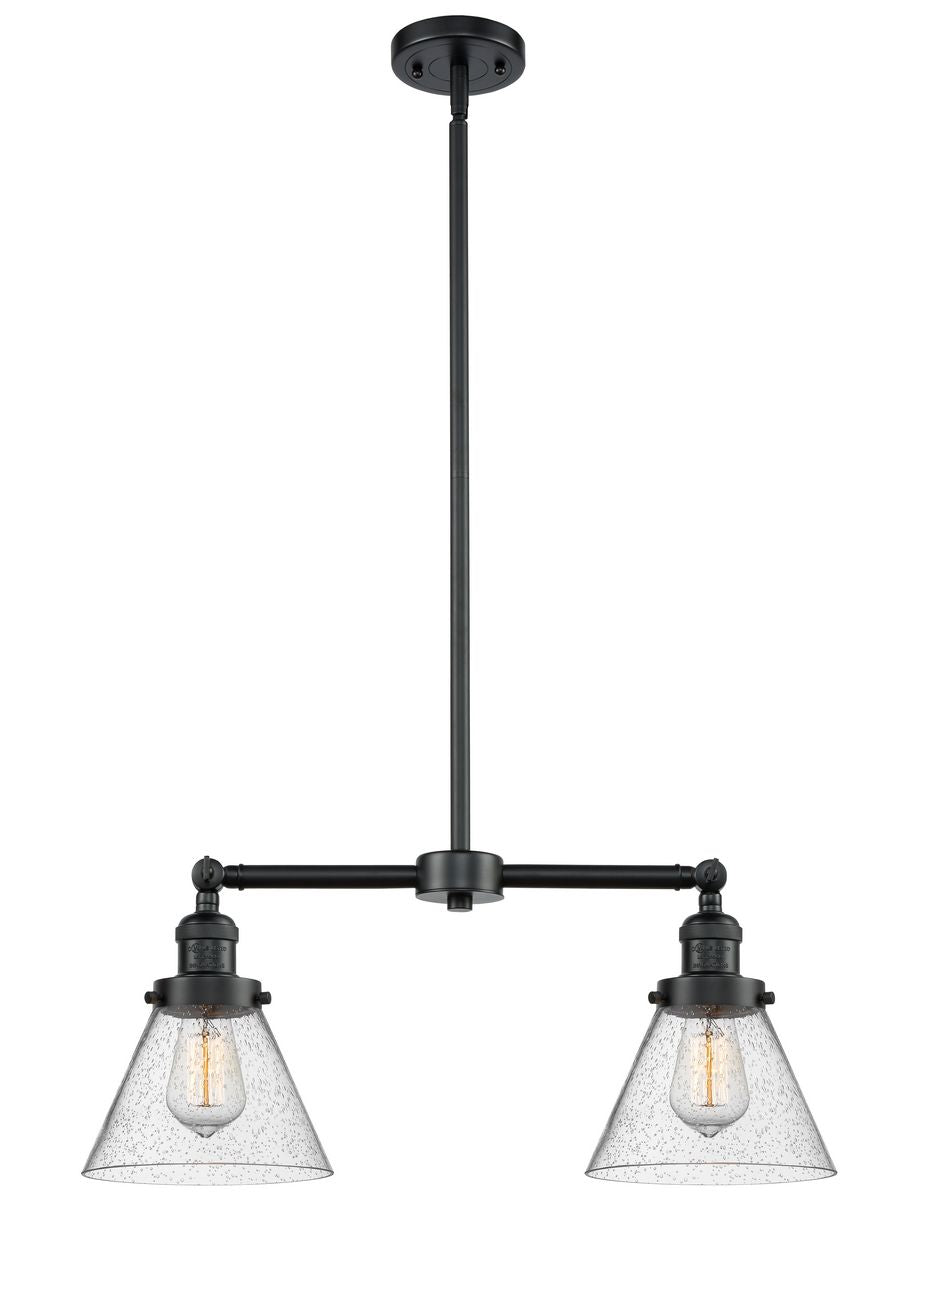 209-OB-G44 2-Light 21" Oil Rubbed Bronze Island Light - Seedy Large Cone Glass - LED Bulb - Dimmensions: 21 x 5 x 10<br>Minimum Height : 21.125<br>Maximum Height : 45.125 - Sloped Ceiling Compatible: Yes